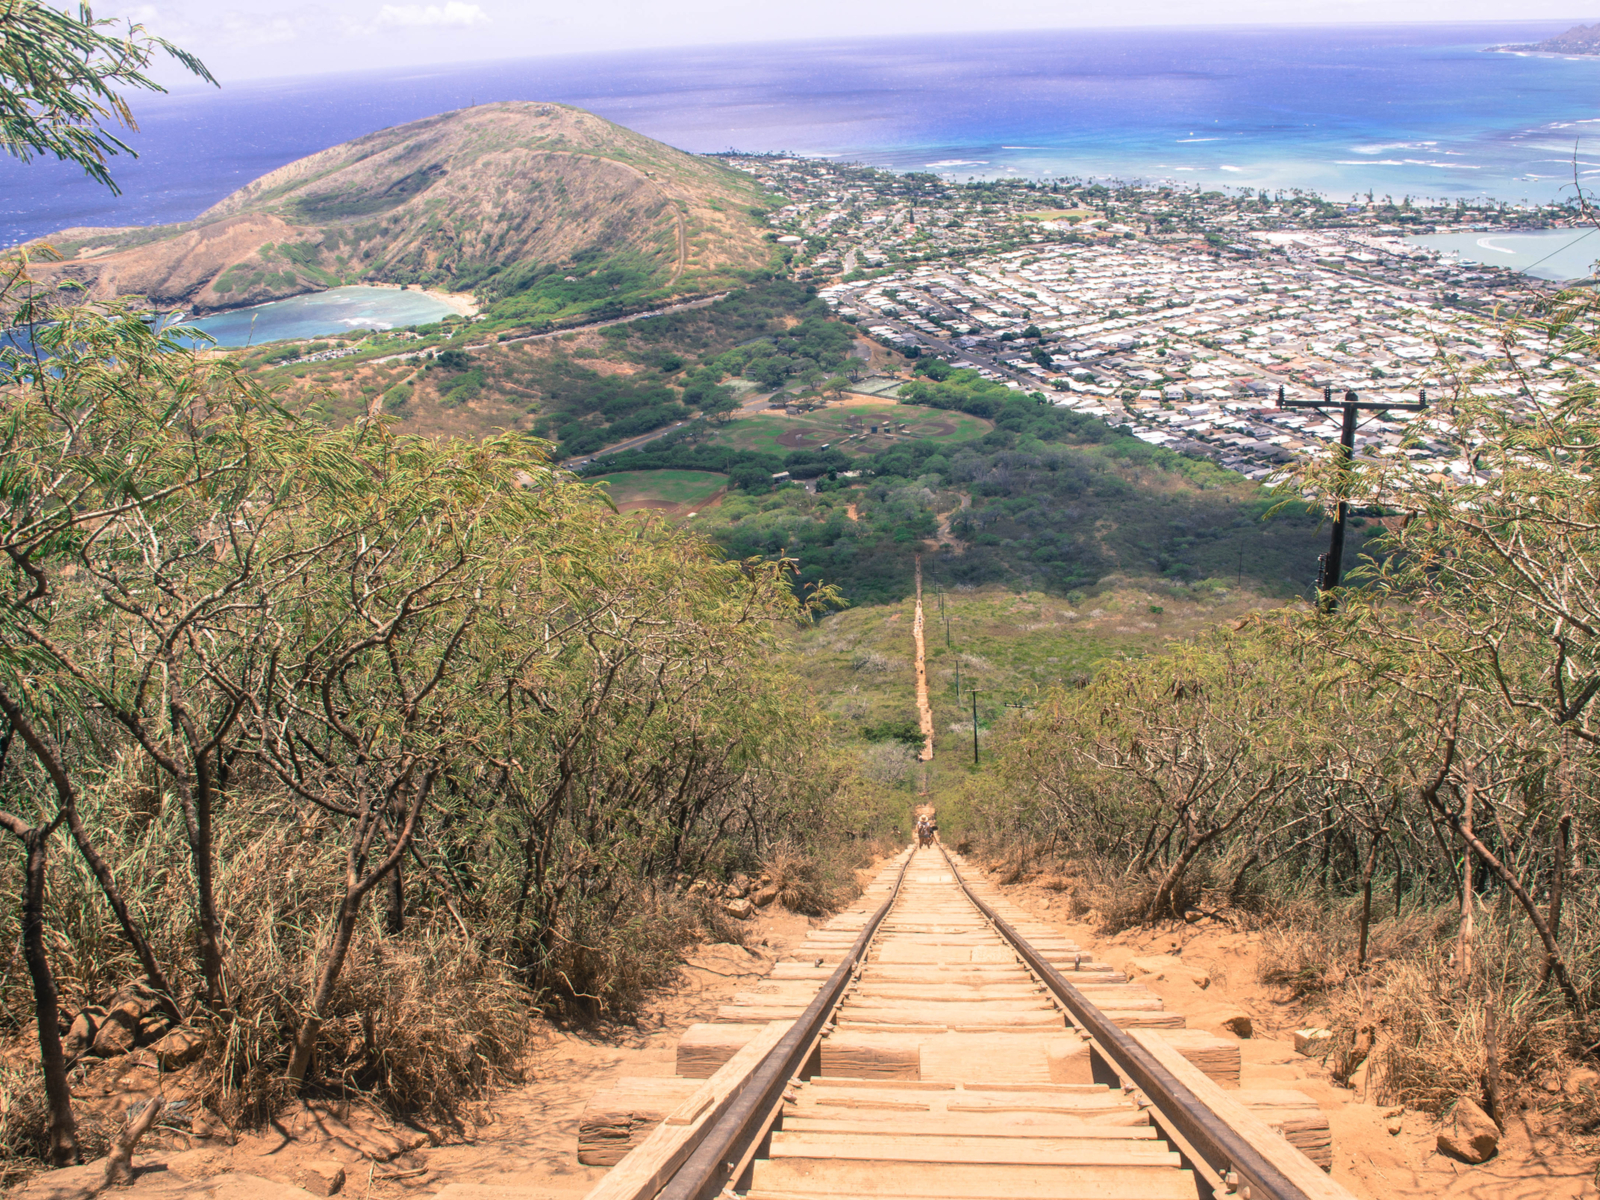 Koko Crater trail, one of our favorite hikes in Hawaii